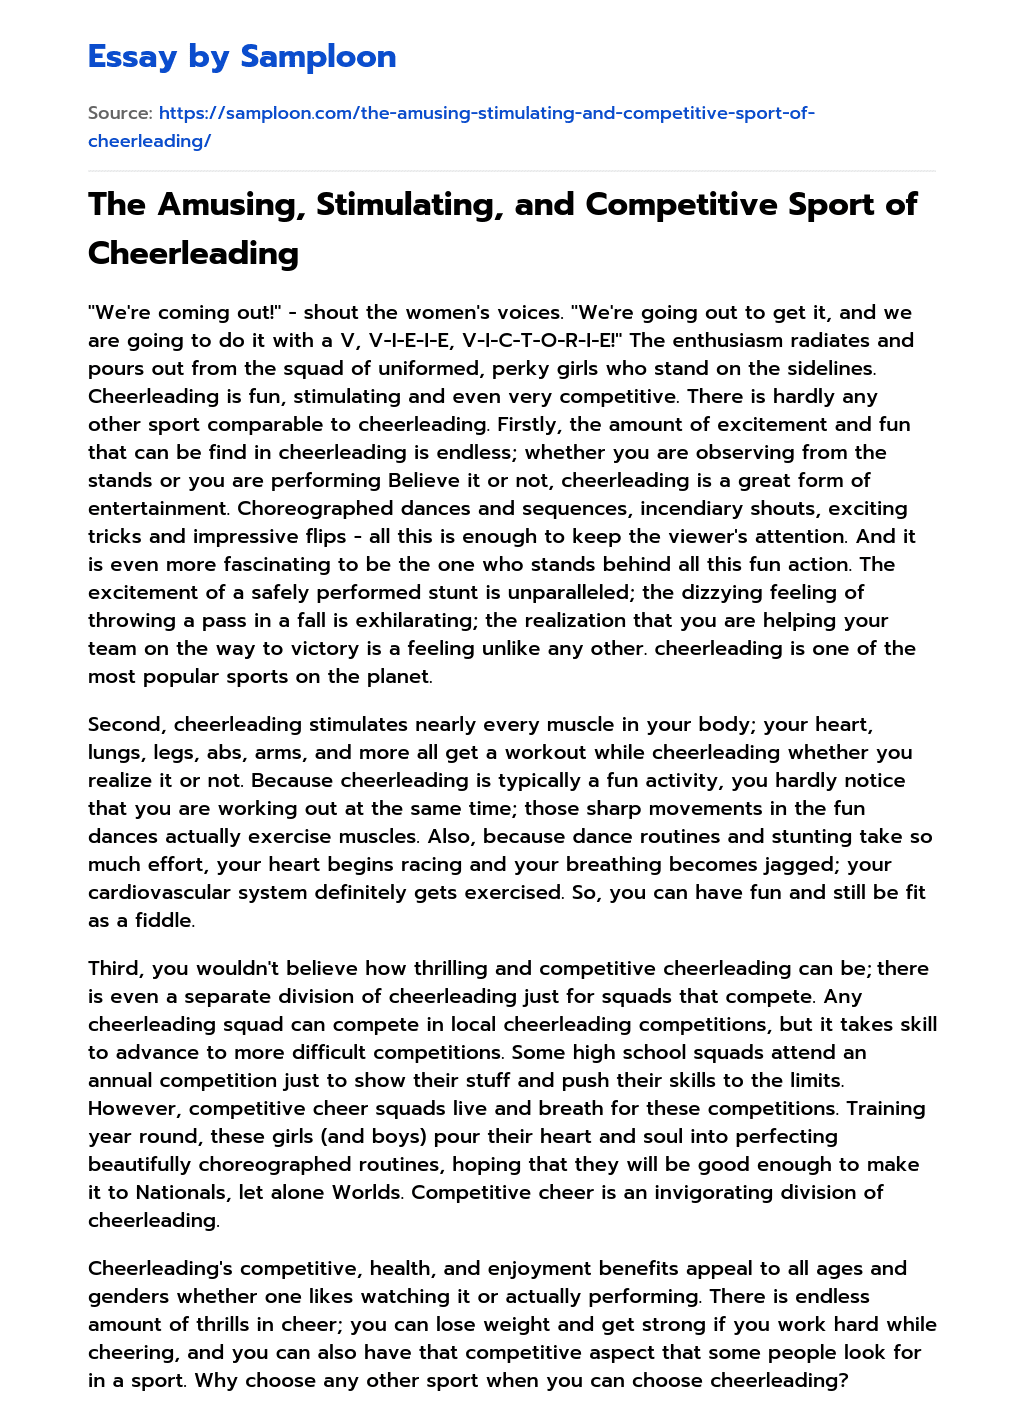 The Amusing, Stimulating, and Competitive Sport of Cheerleading essay